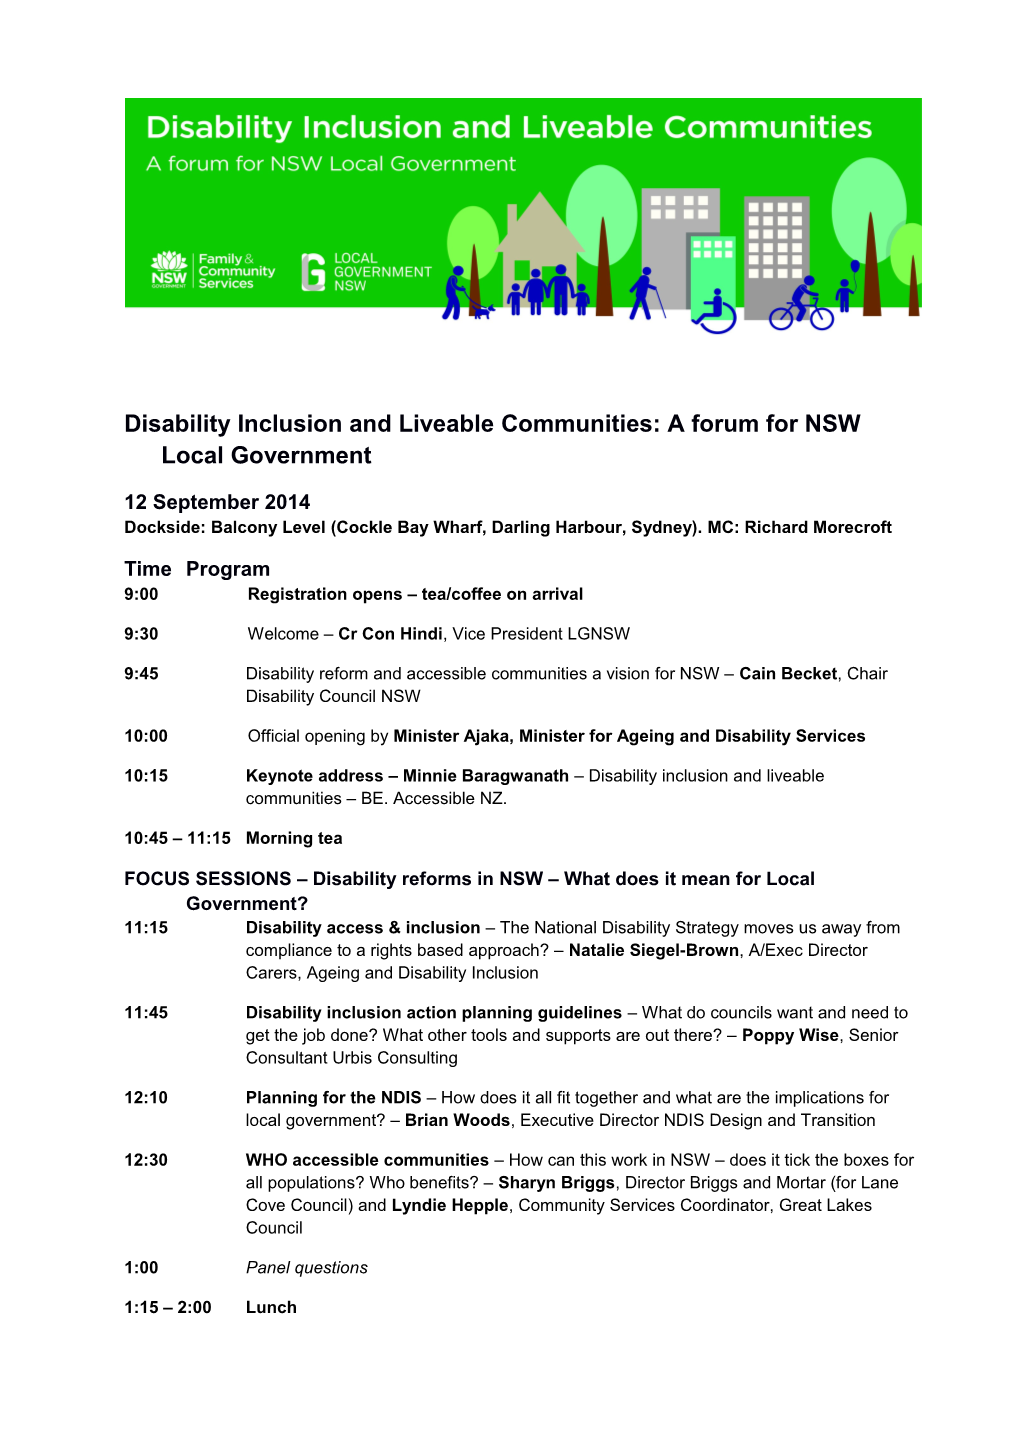 Disability Inclusion and Liveable Communities Forum Program - September 12Th 2014